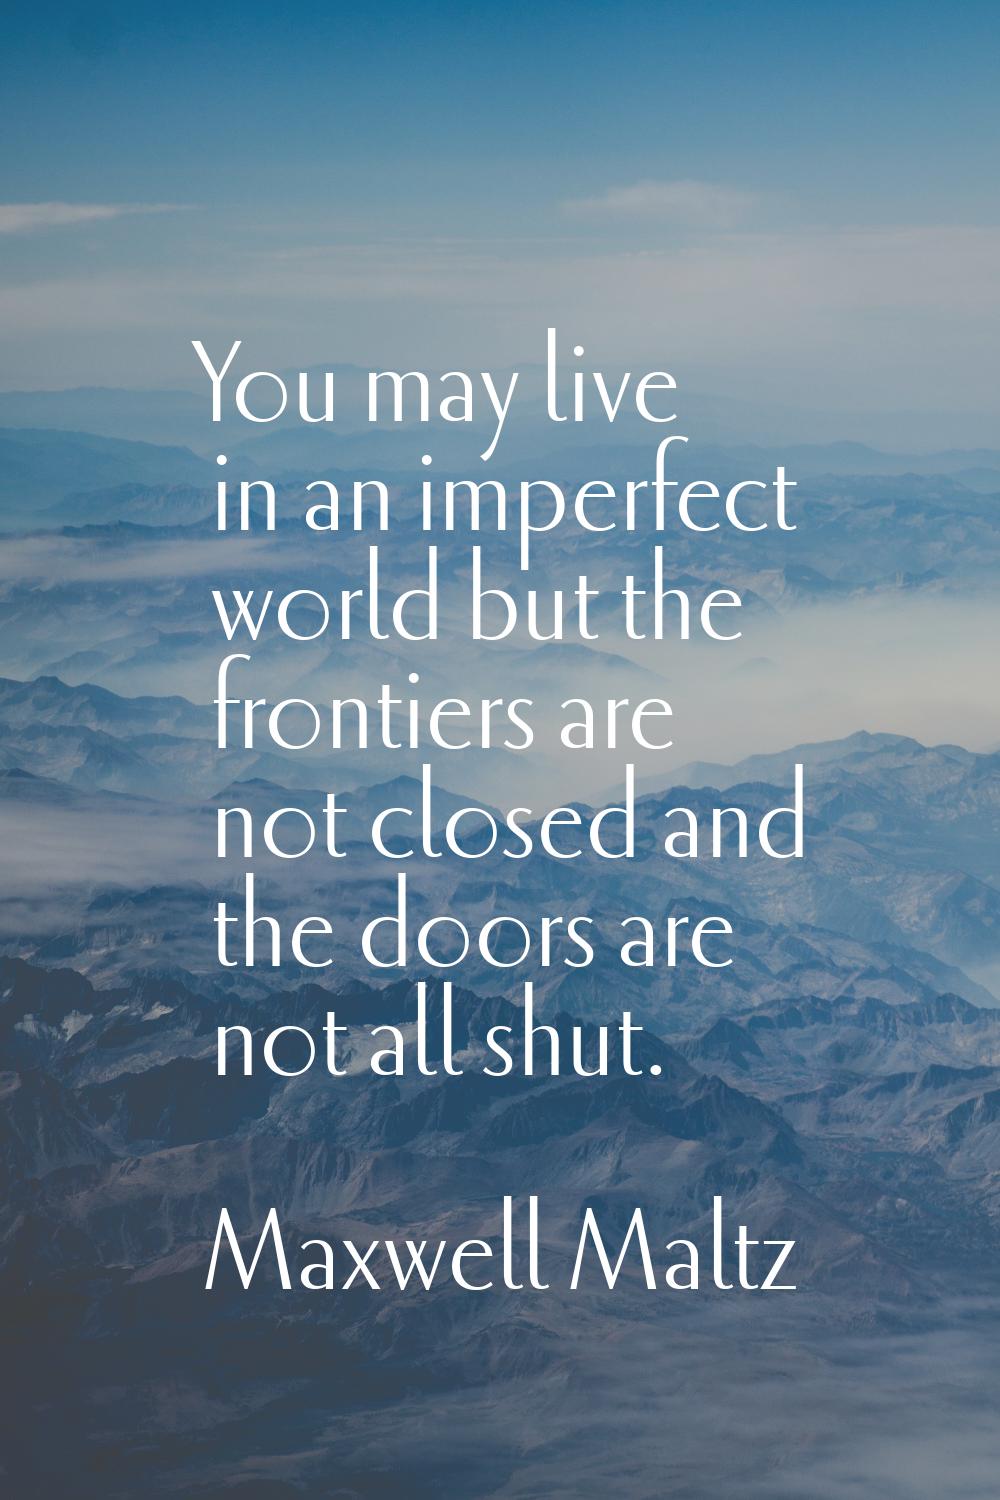 You may live in an imperfect world but the frontiers are not closed and the doors are not all shut.